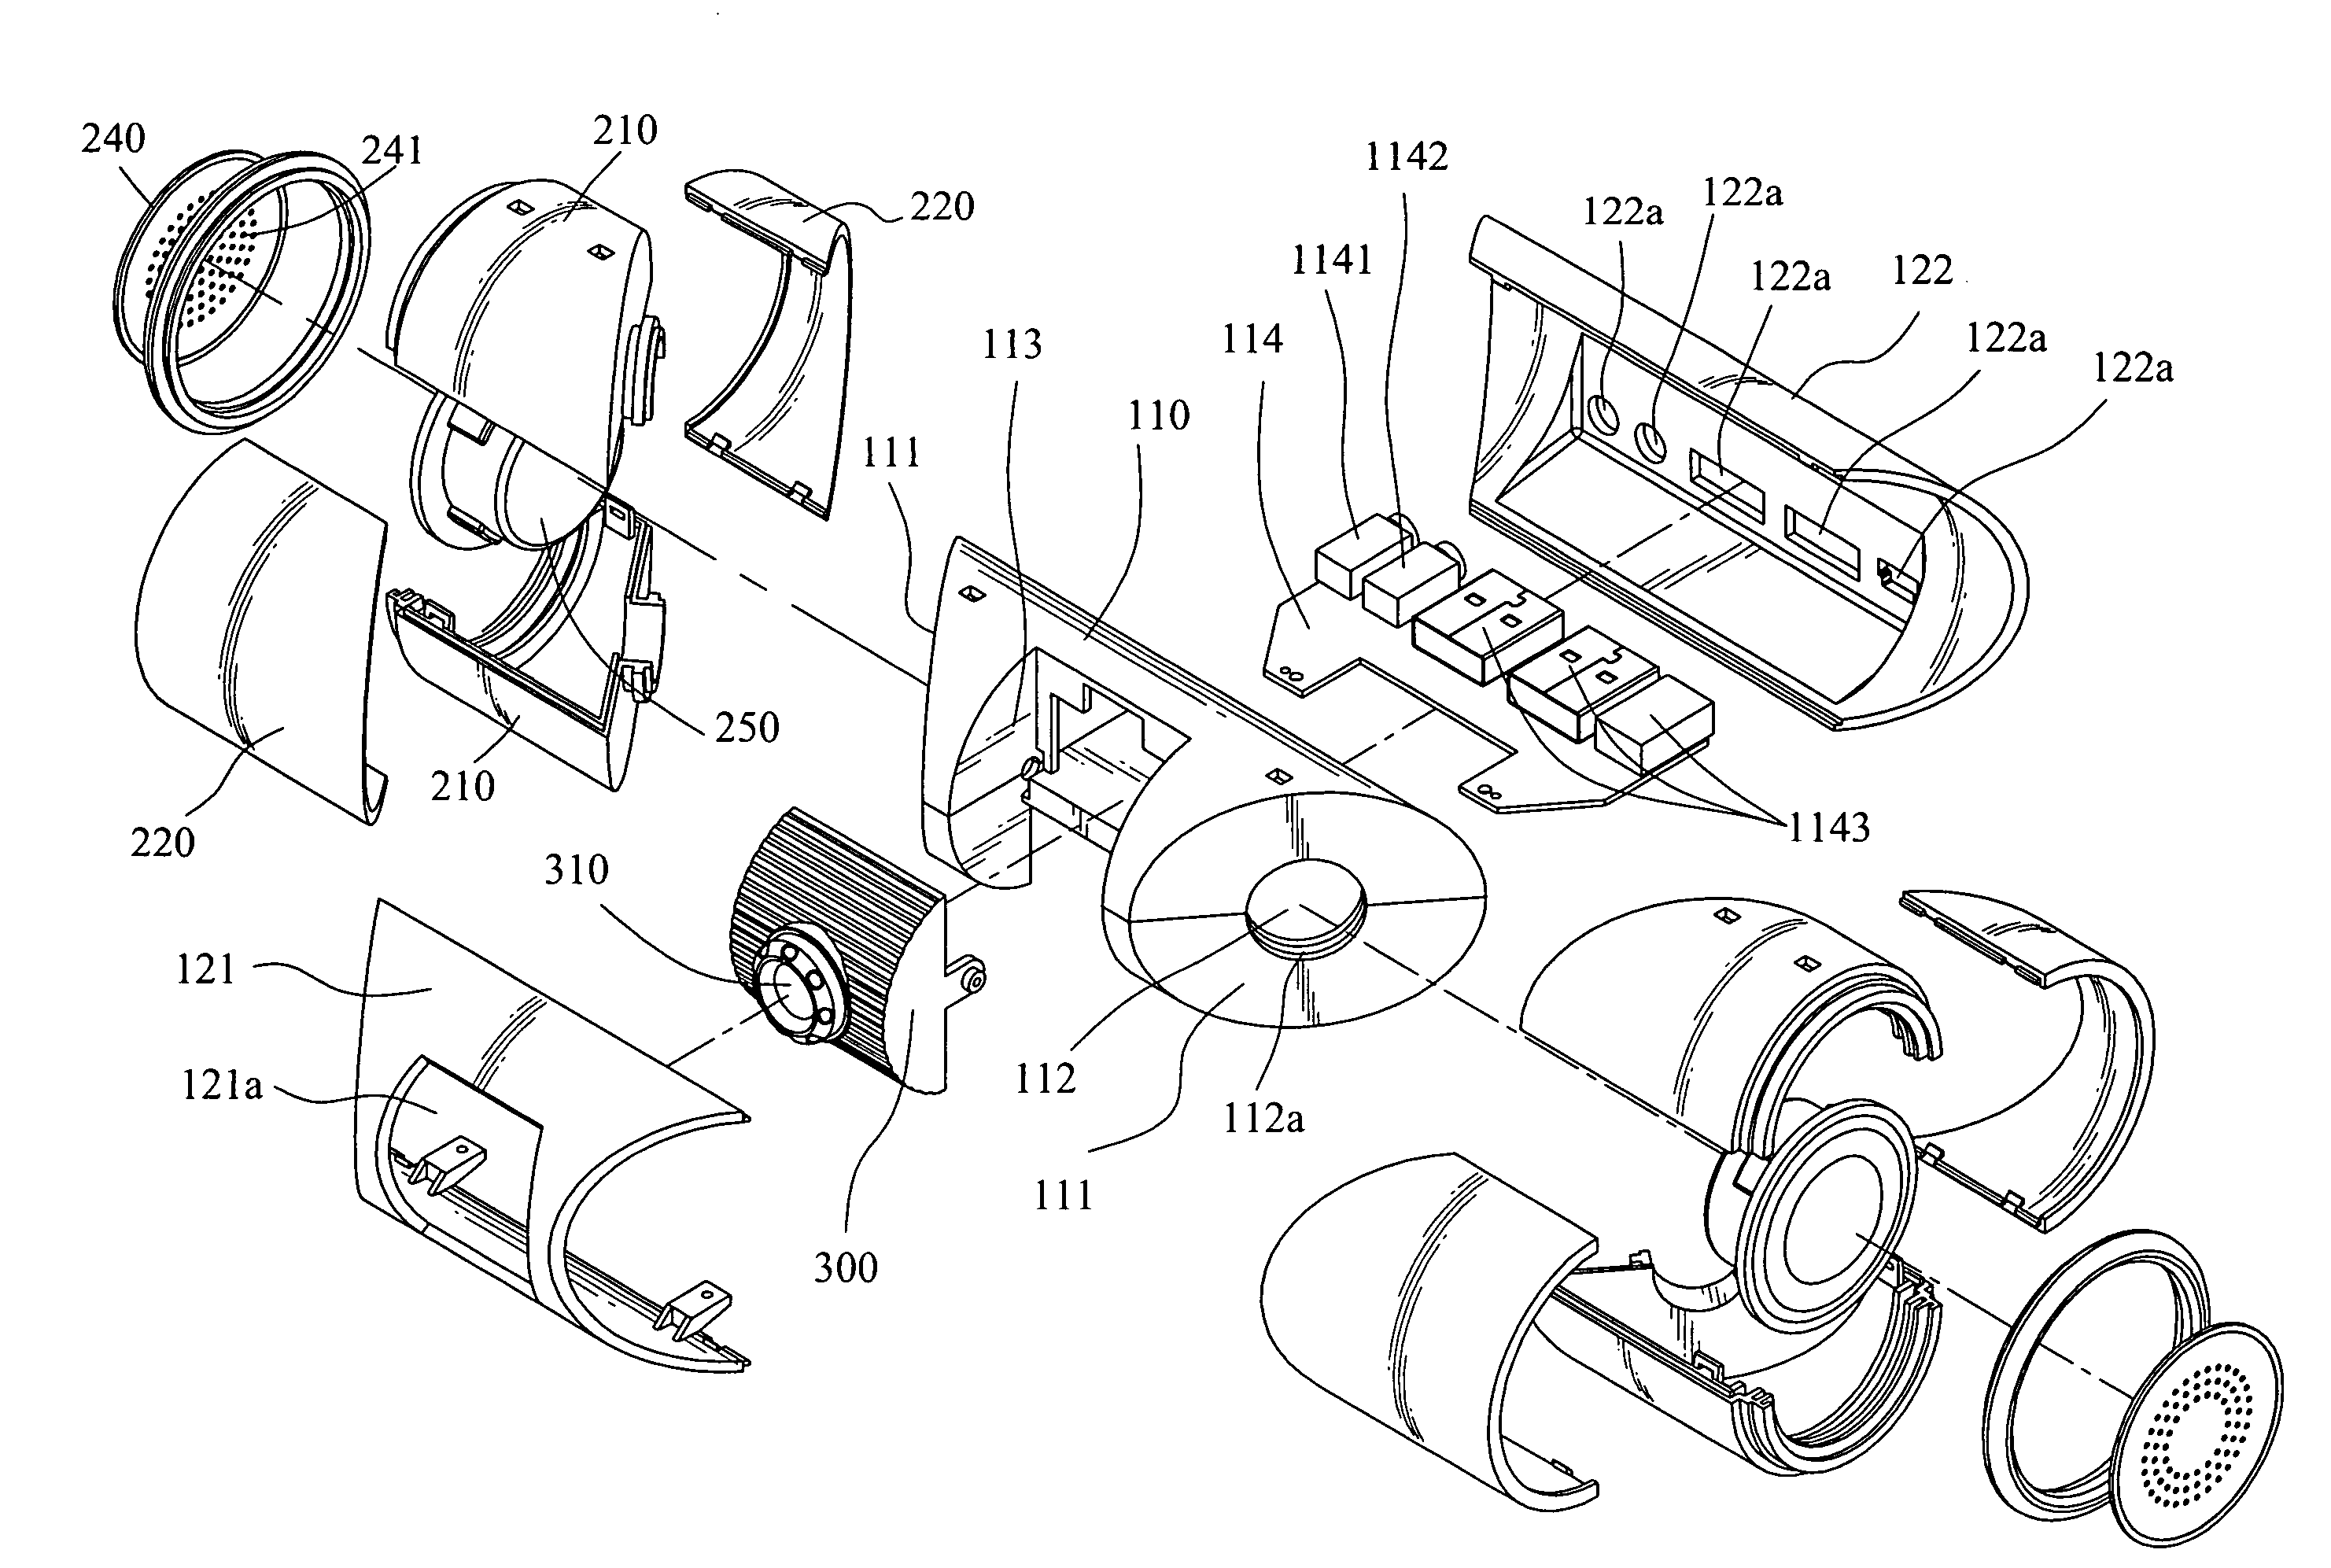 Multifunction camera assembly for a computer